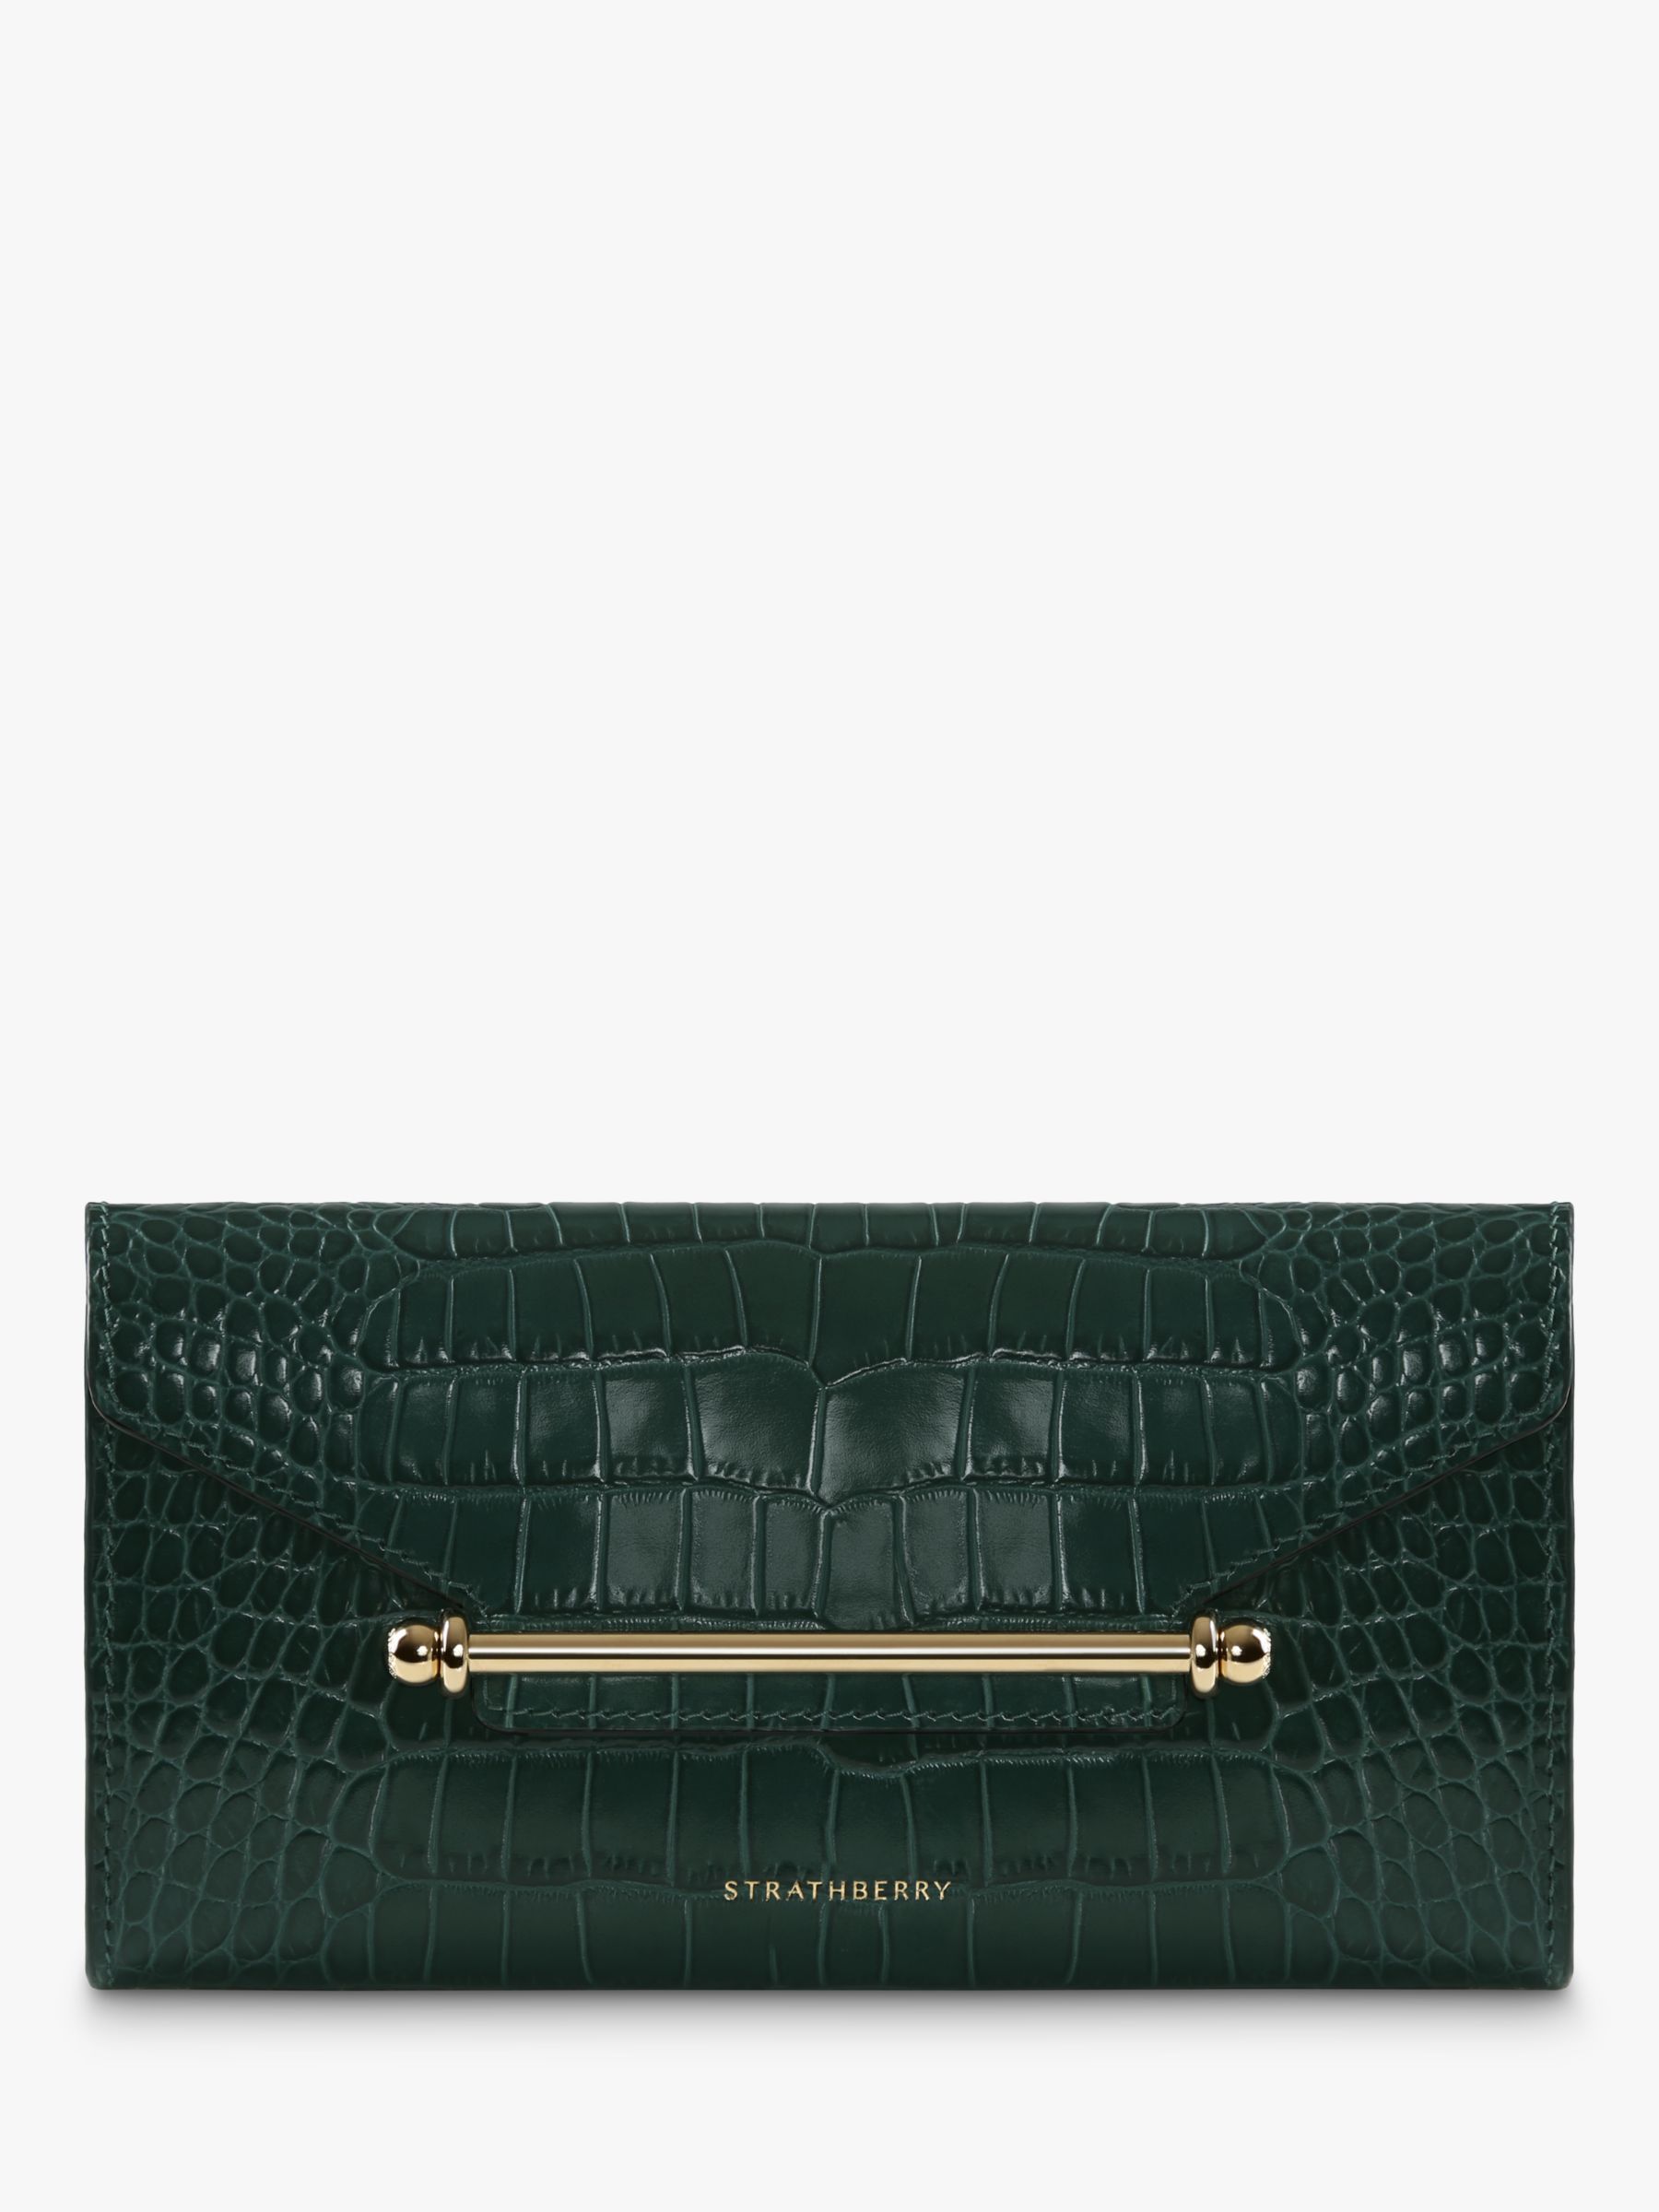 Strathberry Multrees Leather Wallet On Chain, Bottle Green Croc at John ...